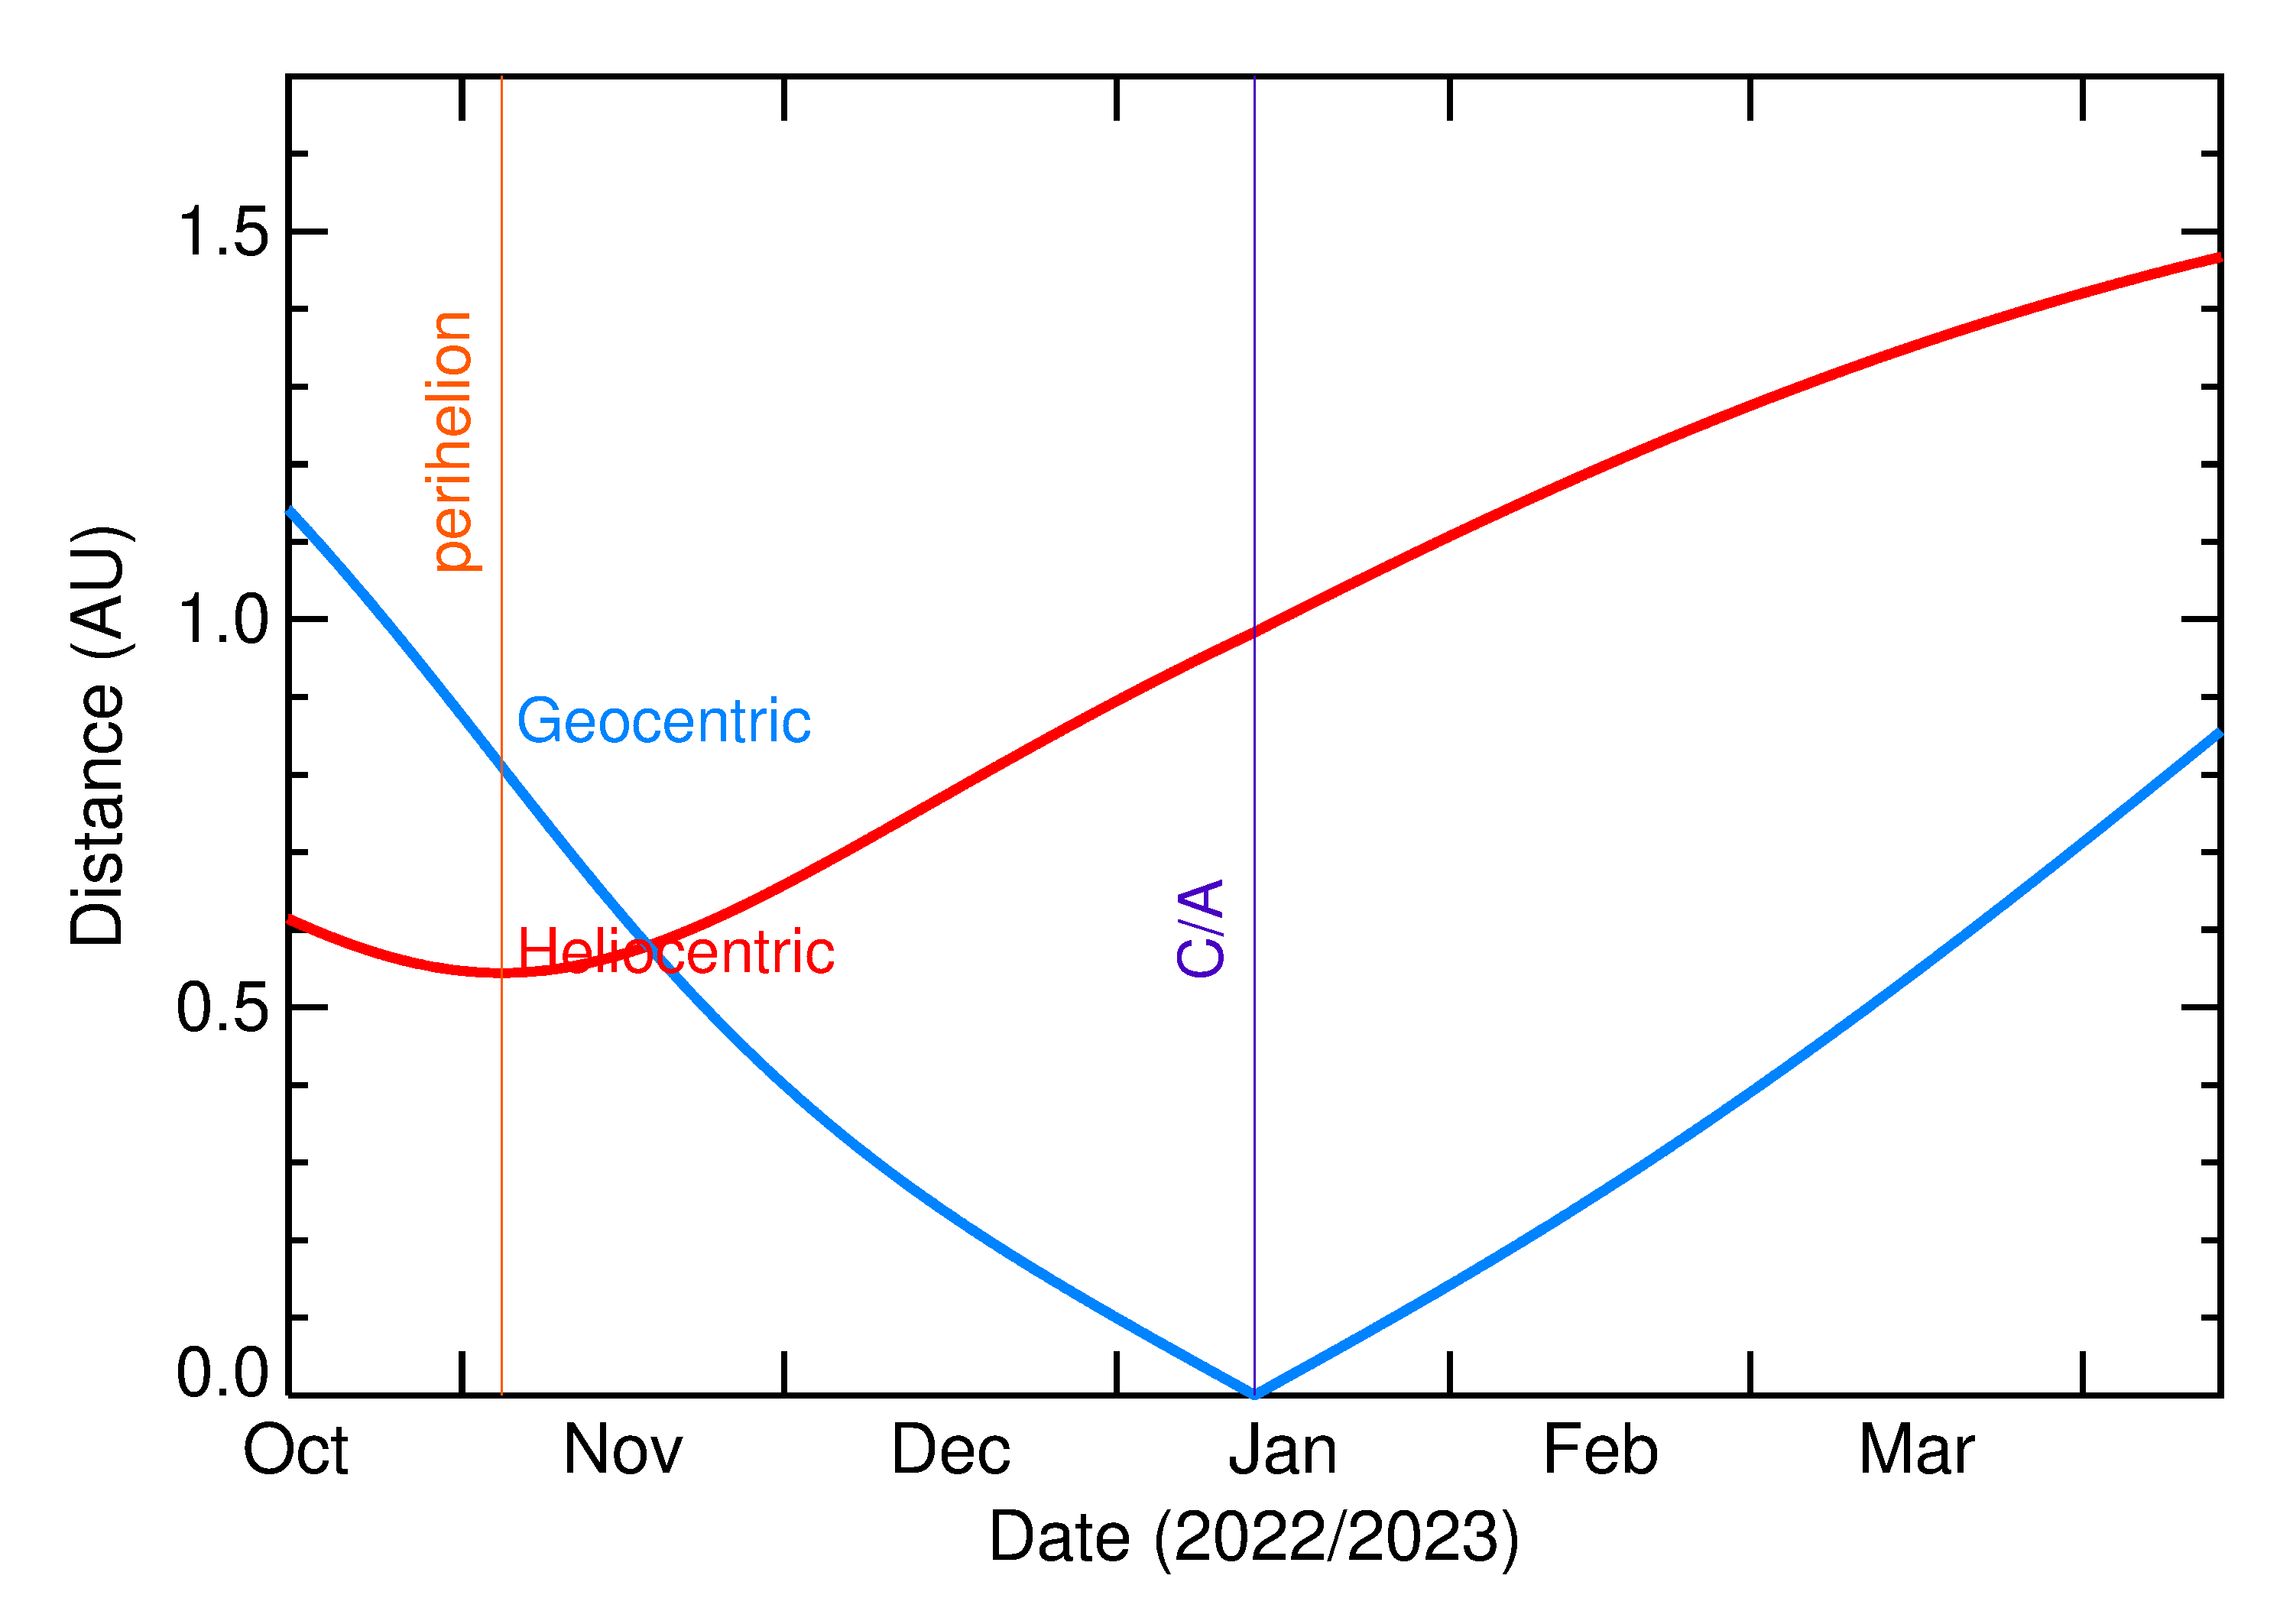 Heliocentric and Geocentric Distances of 2023 AV in the months around closest approach